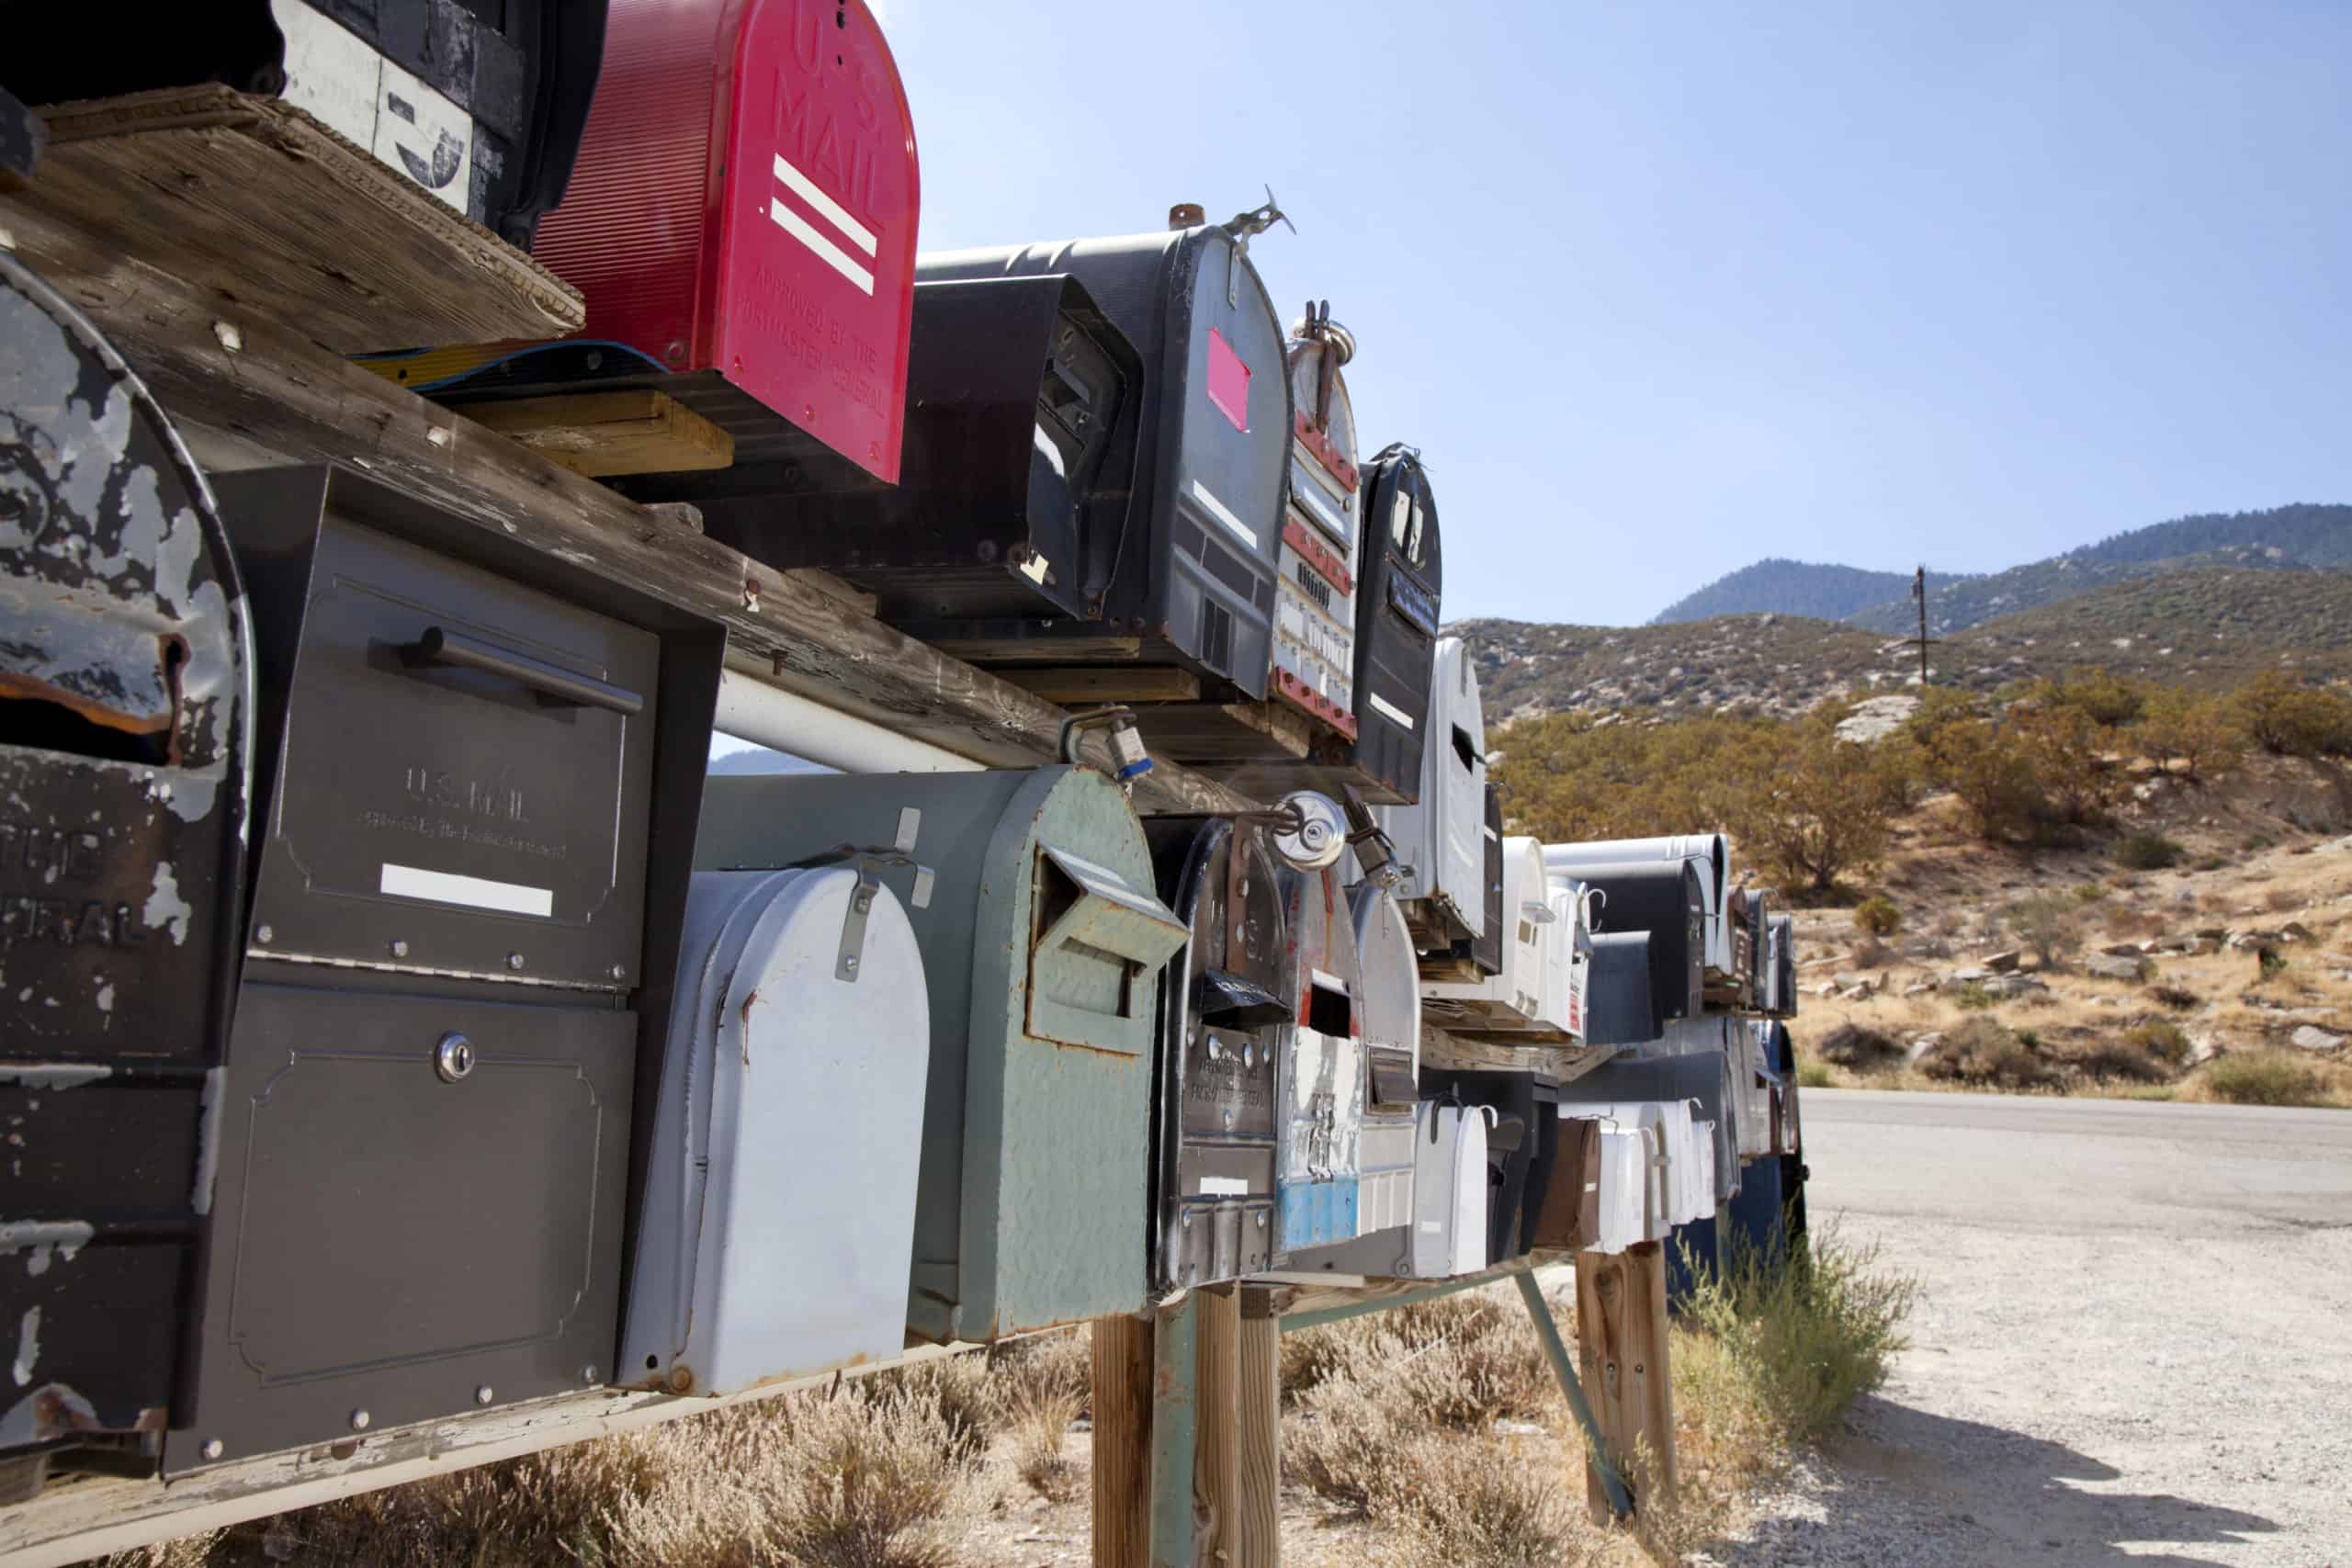 Rows of mailboxes open to identity theft on the side of a rural road.